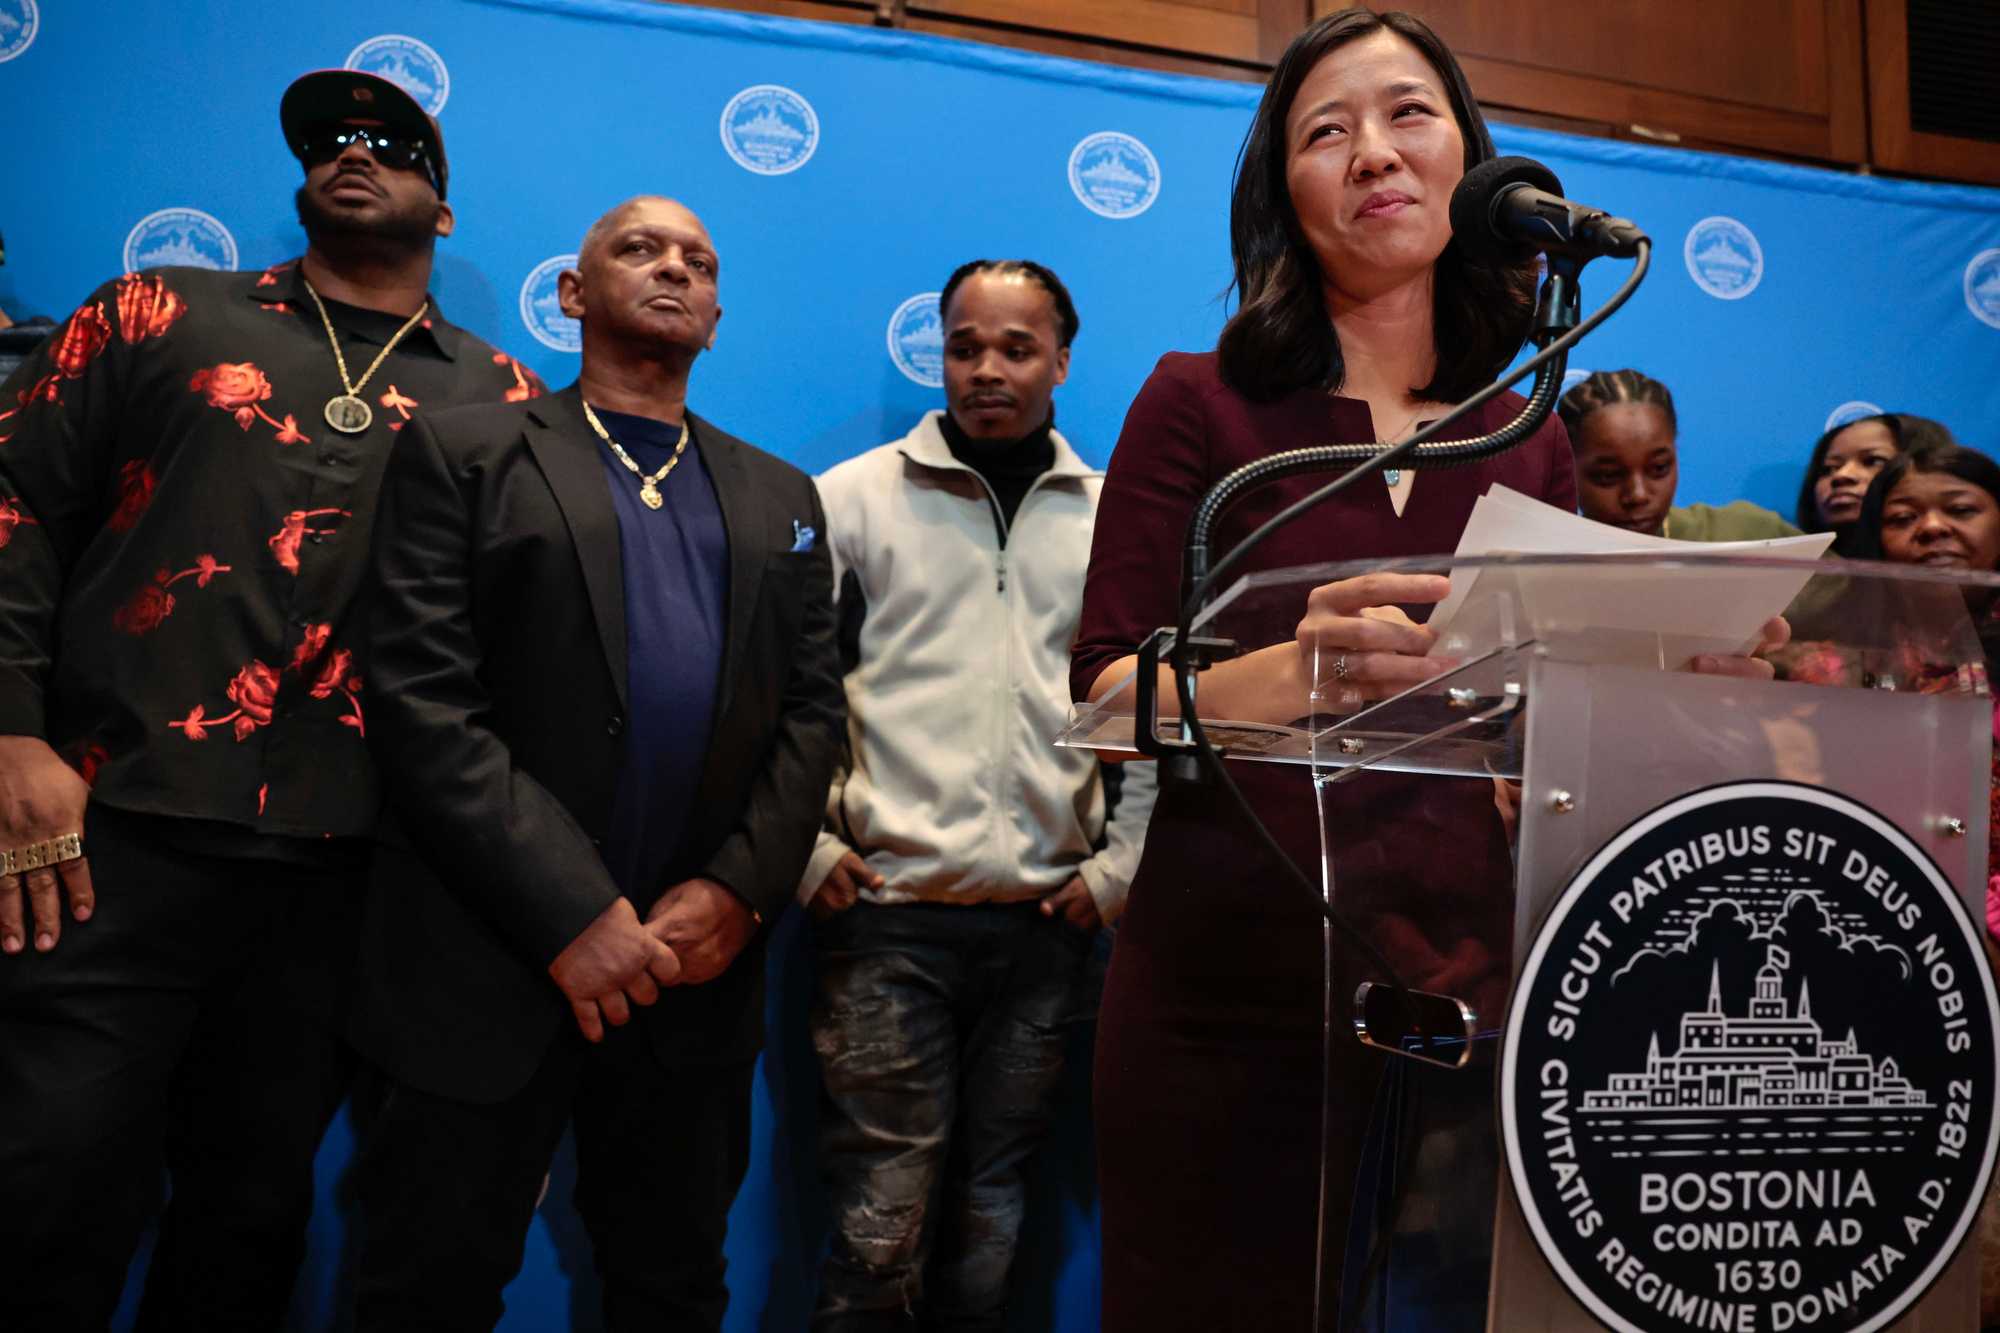 Boston, MA - 12/20/2023: Mayor Michelle Wu, right, addresses the crowd including Alan Swanson, second from left, and members of the Bennett family during a press conference and public apology to Swanson and Willie Bennett at City Hall in Boston, MA  on December 20, 2023. More than 34 years after Charles Stuart shot his pregnant wife and blamed a Black man for the crime, Mayor Michelle Wu issued a formal apology from the city to two men who were wrongly linked to the shooting, Alan Swanson and Willie Bennett.  (Craig F. Walker/Globe Staff)